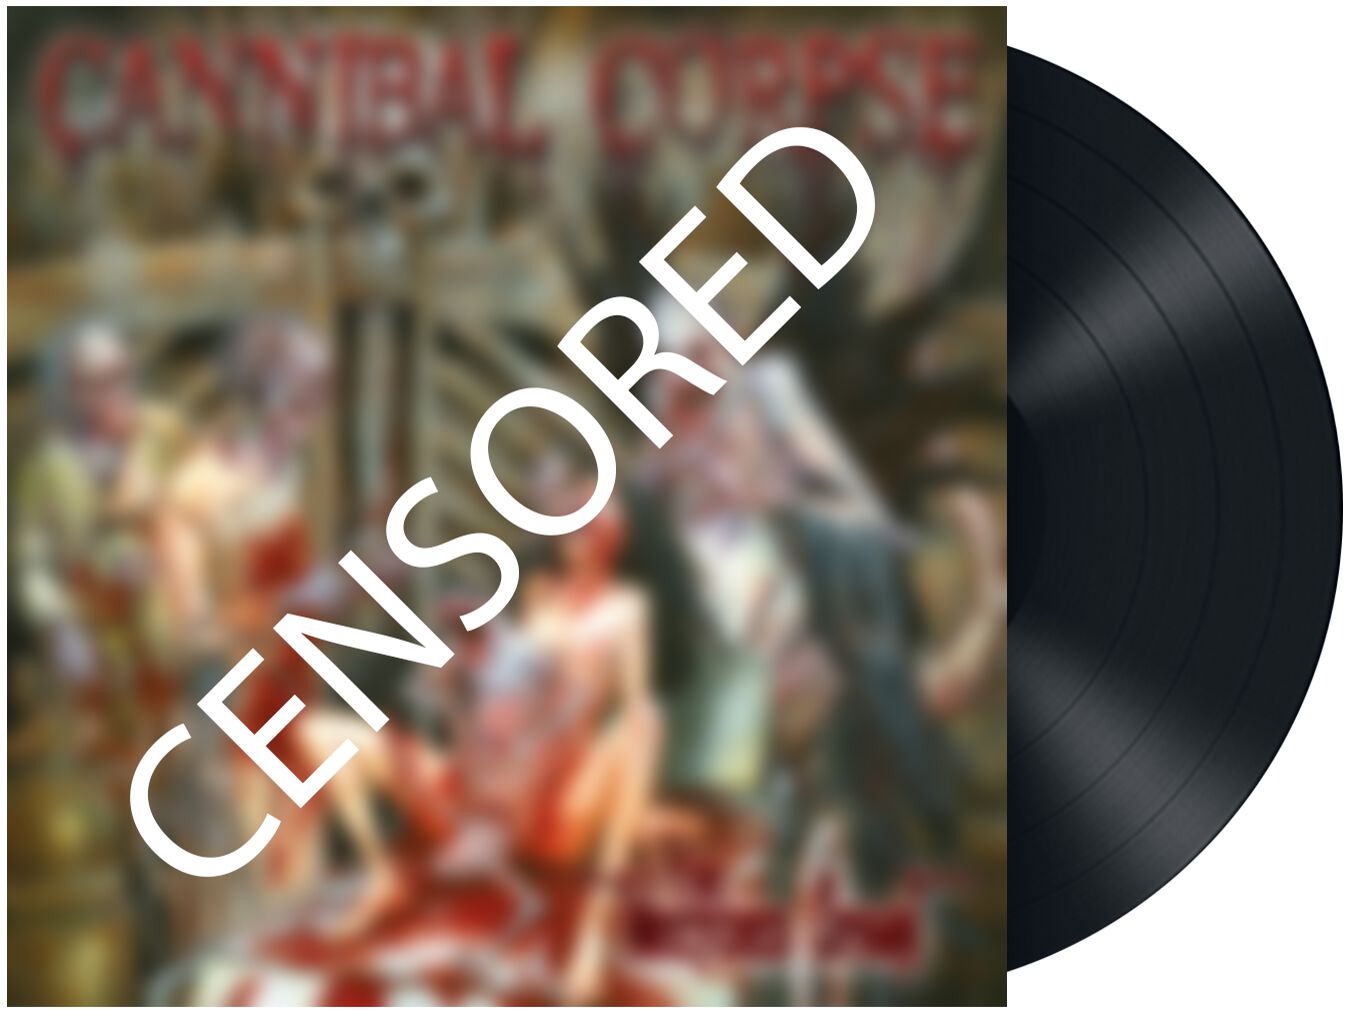 Cannibal Corpse "The Wretched Spawn" 180g Black Vinyl